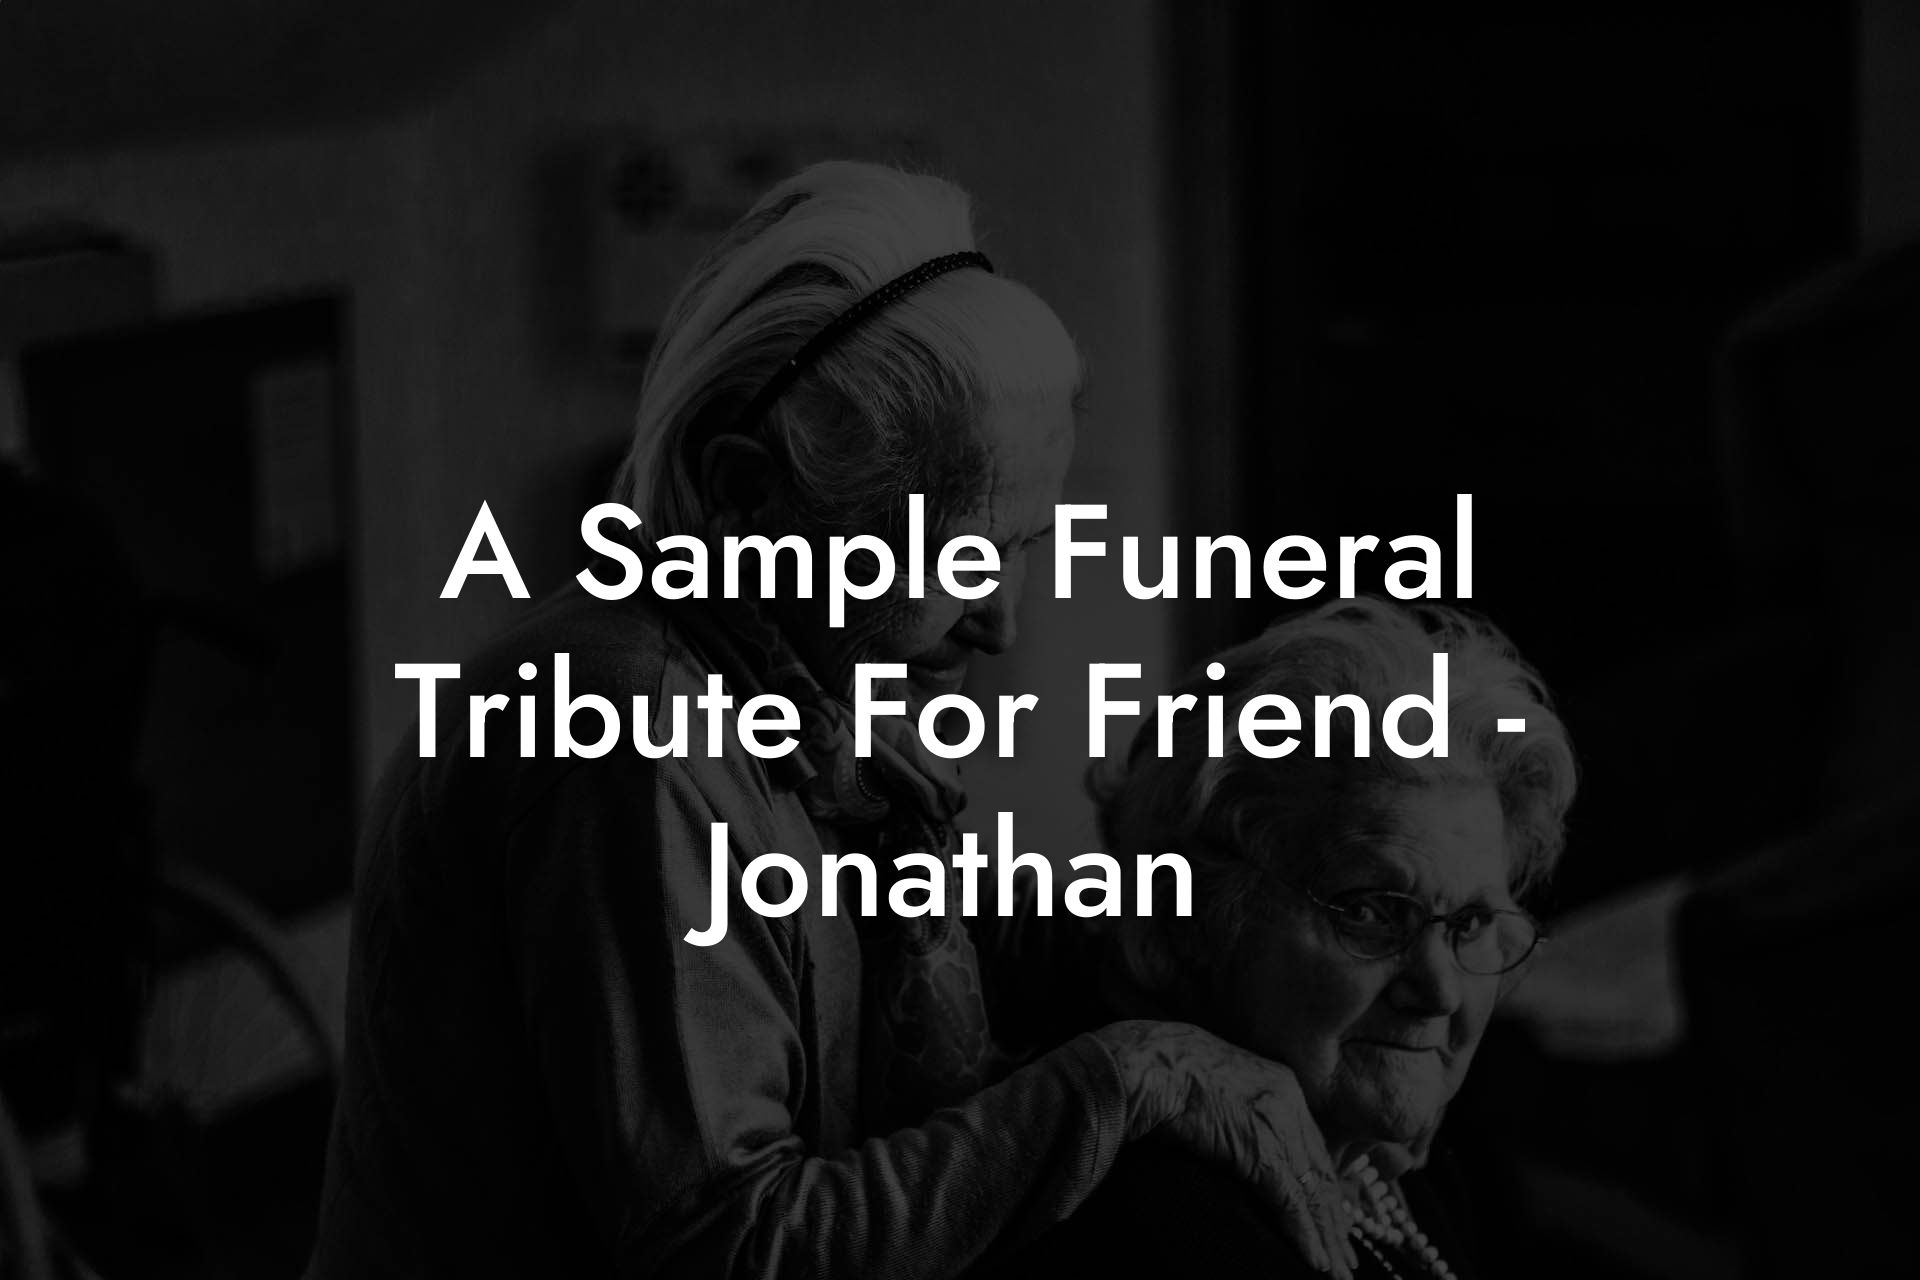 A Sample Funeral Tribute For Friend - Jonathan